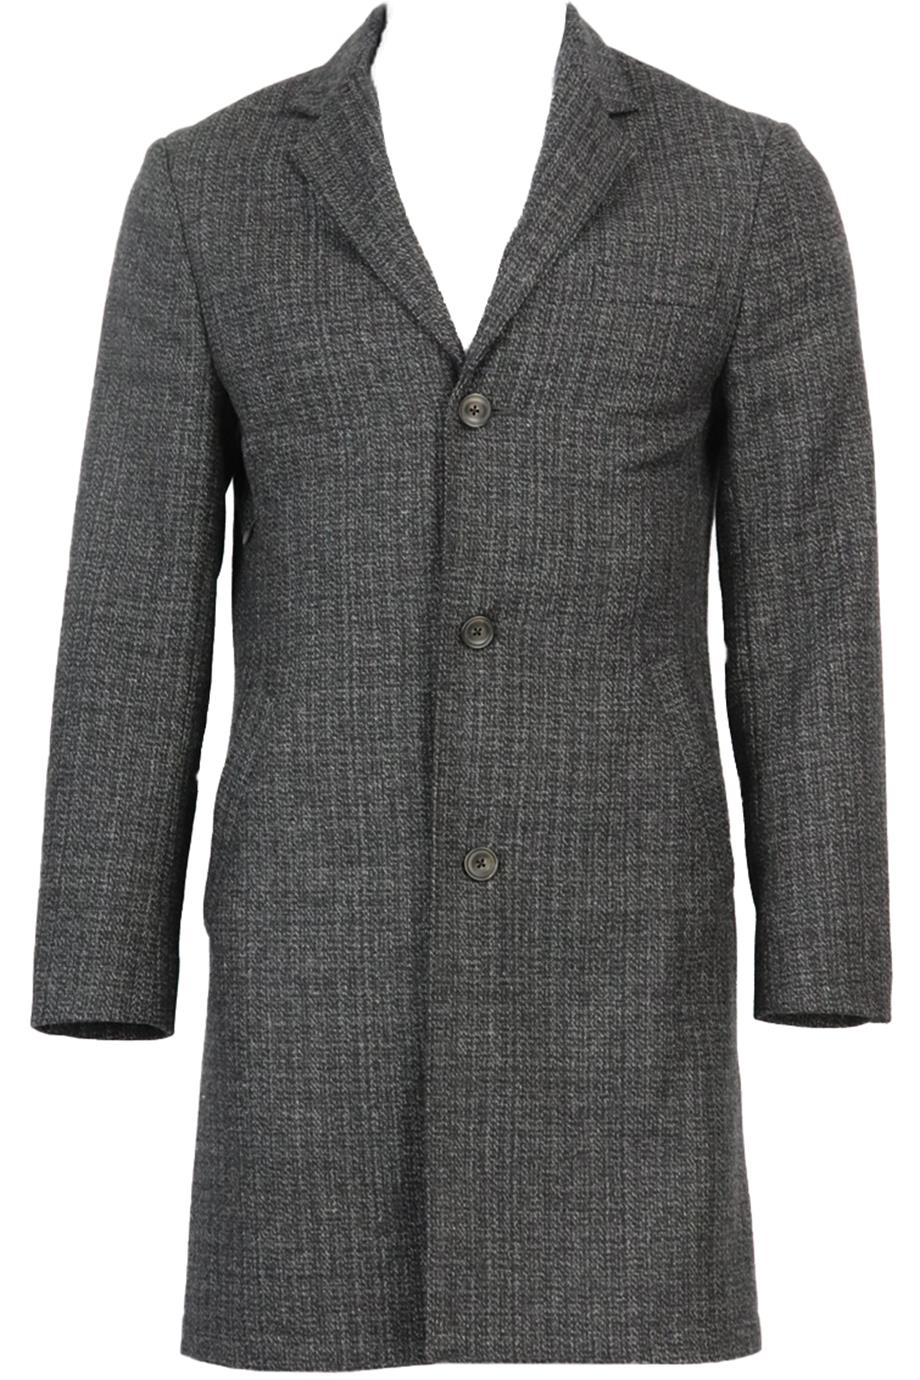 NN07 MEN'S WOOL AND CASHMERE BLEND COAT IT 44 UK/US CHEST 34